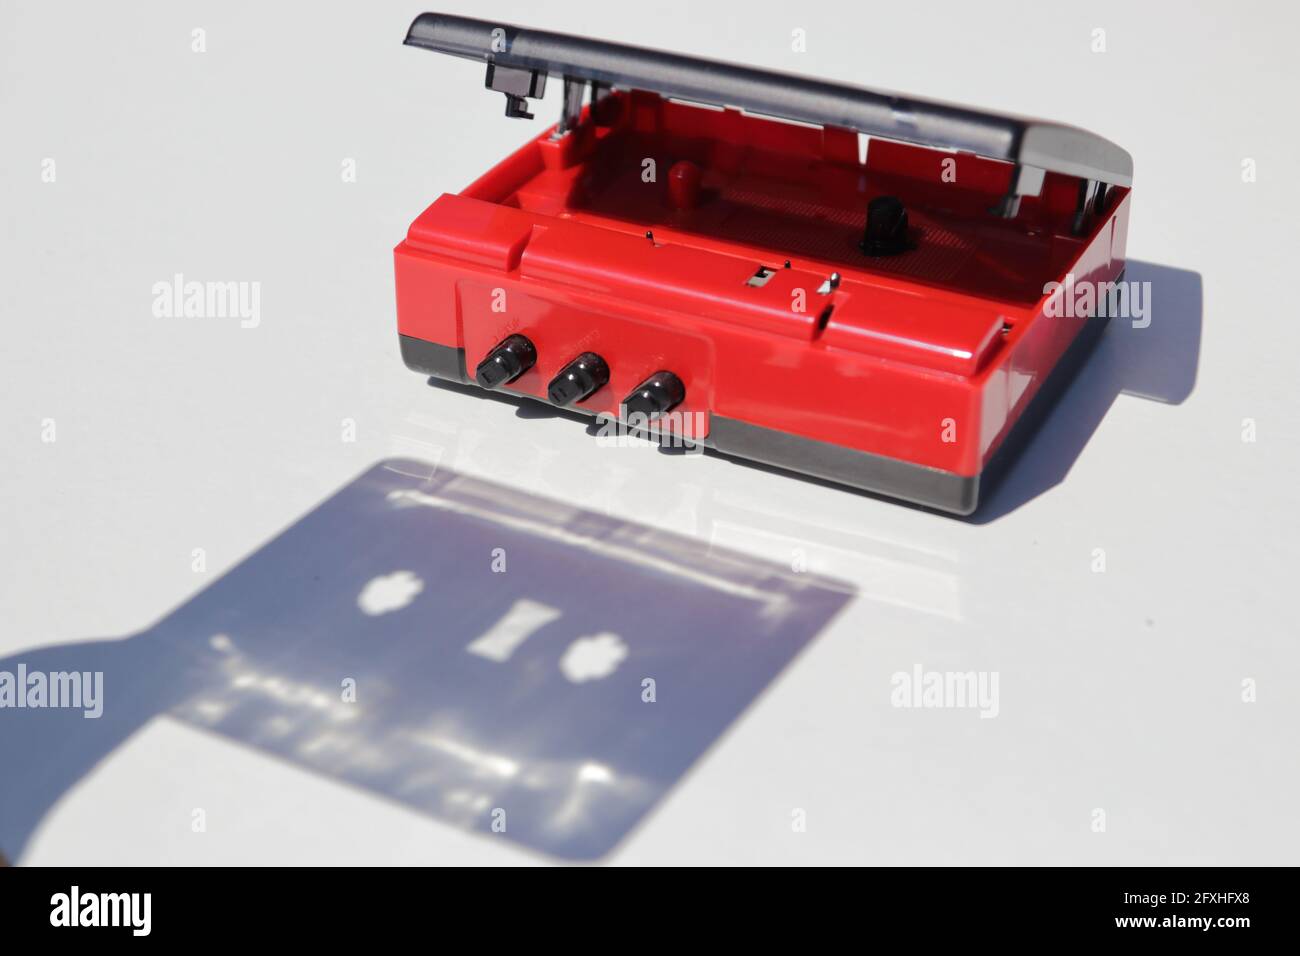 Shadow of cassette tape being inserted into a player Stock Photo